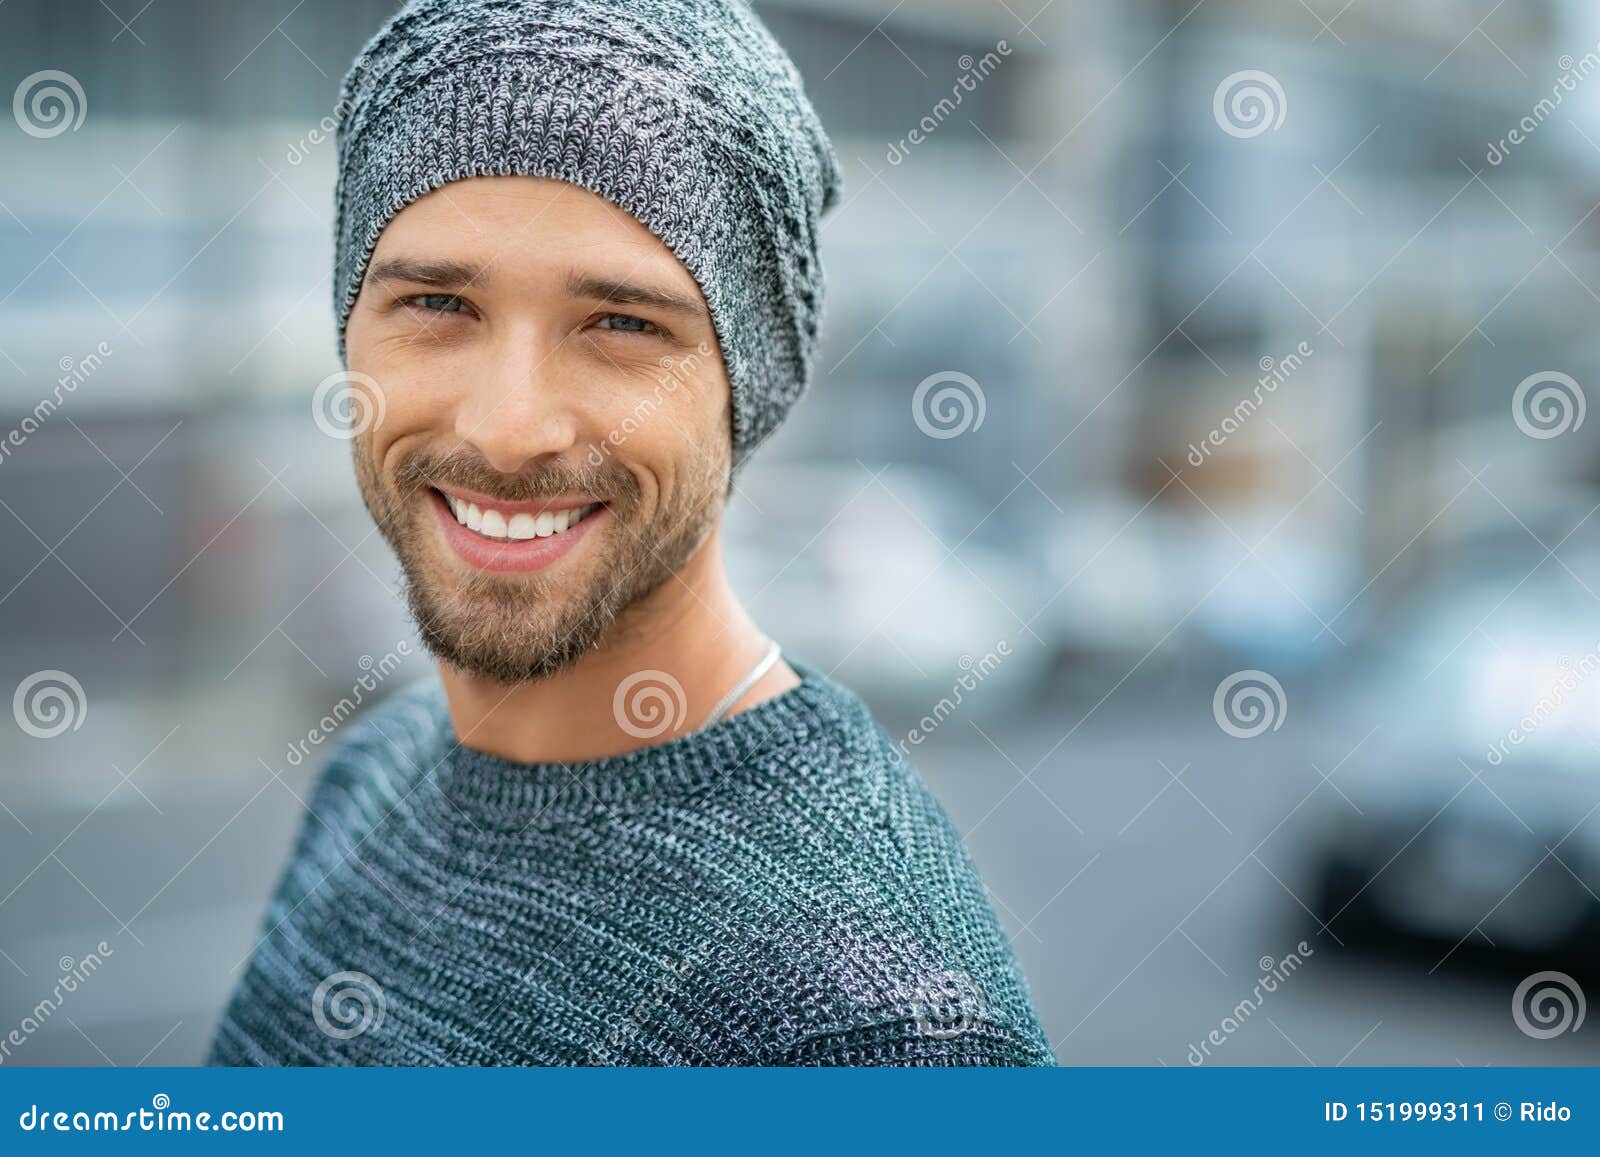 Smiling Handsome Man in Winter Clothes Stock Image - Image of ...